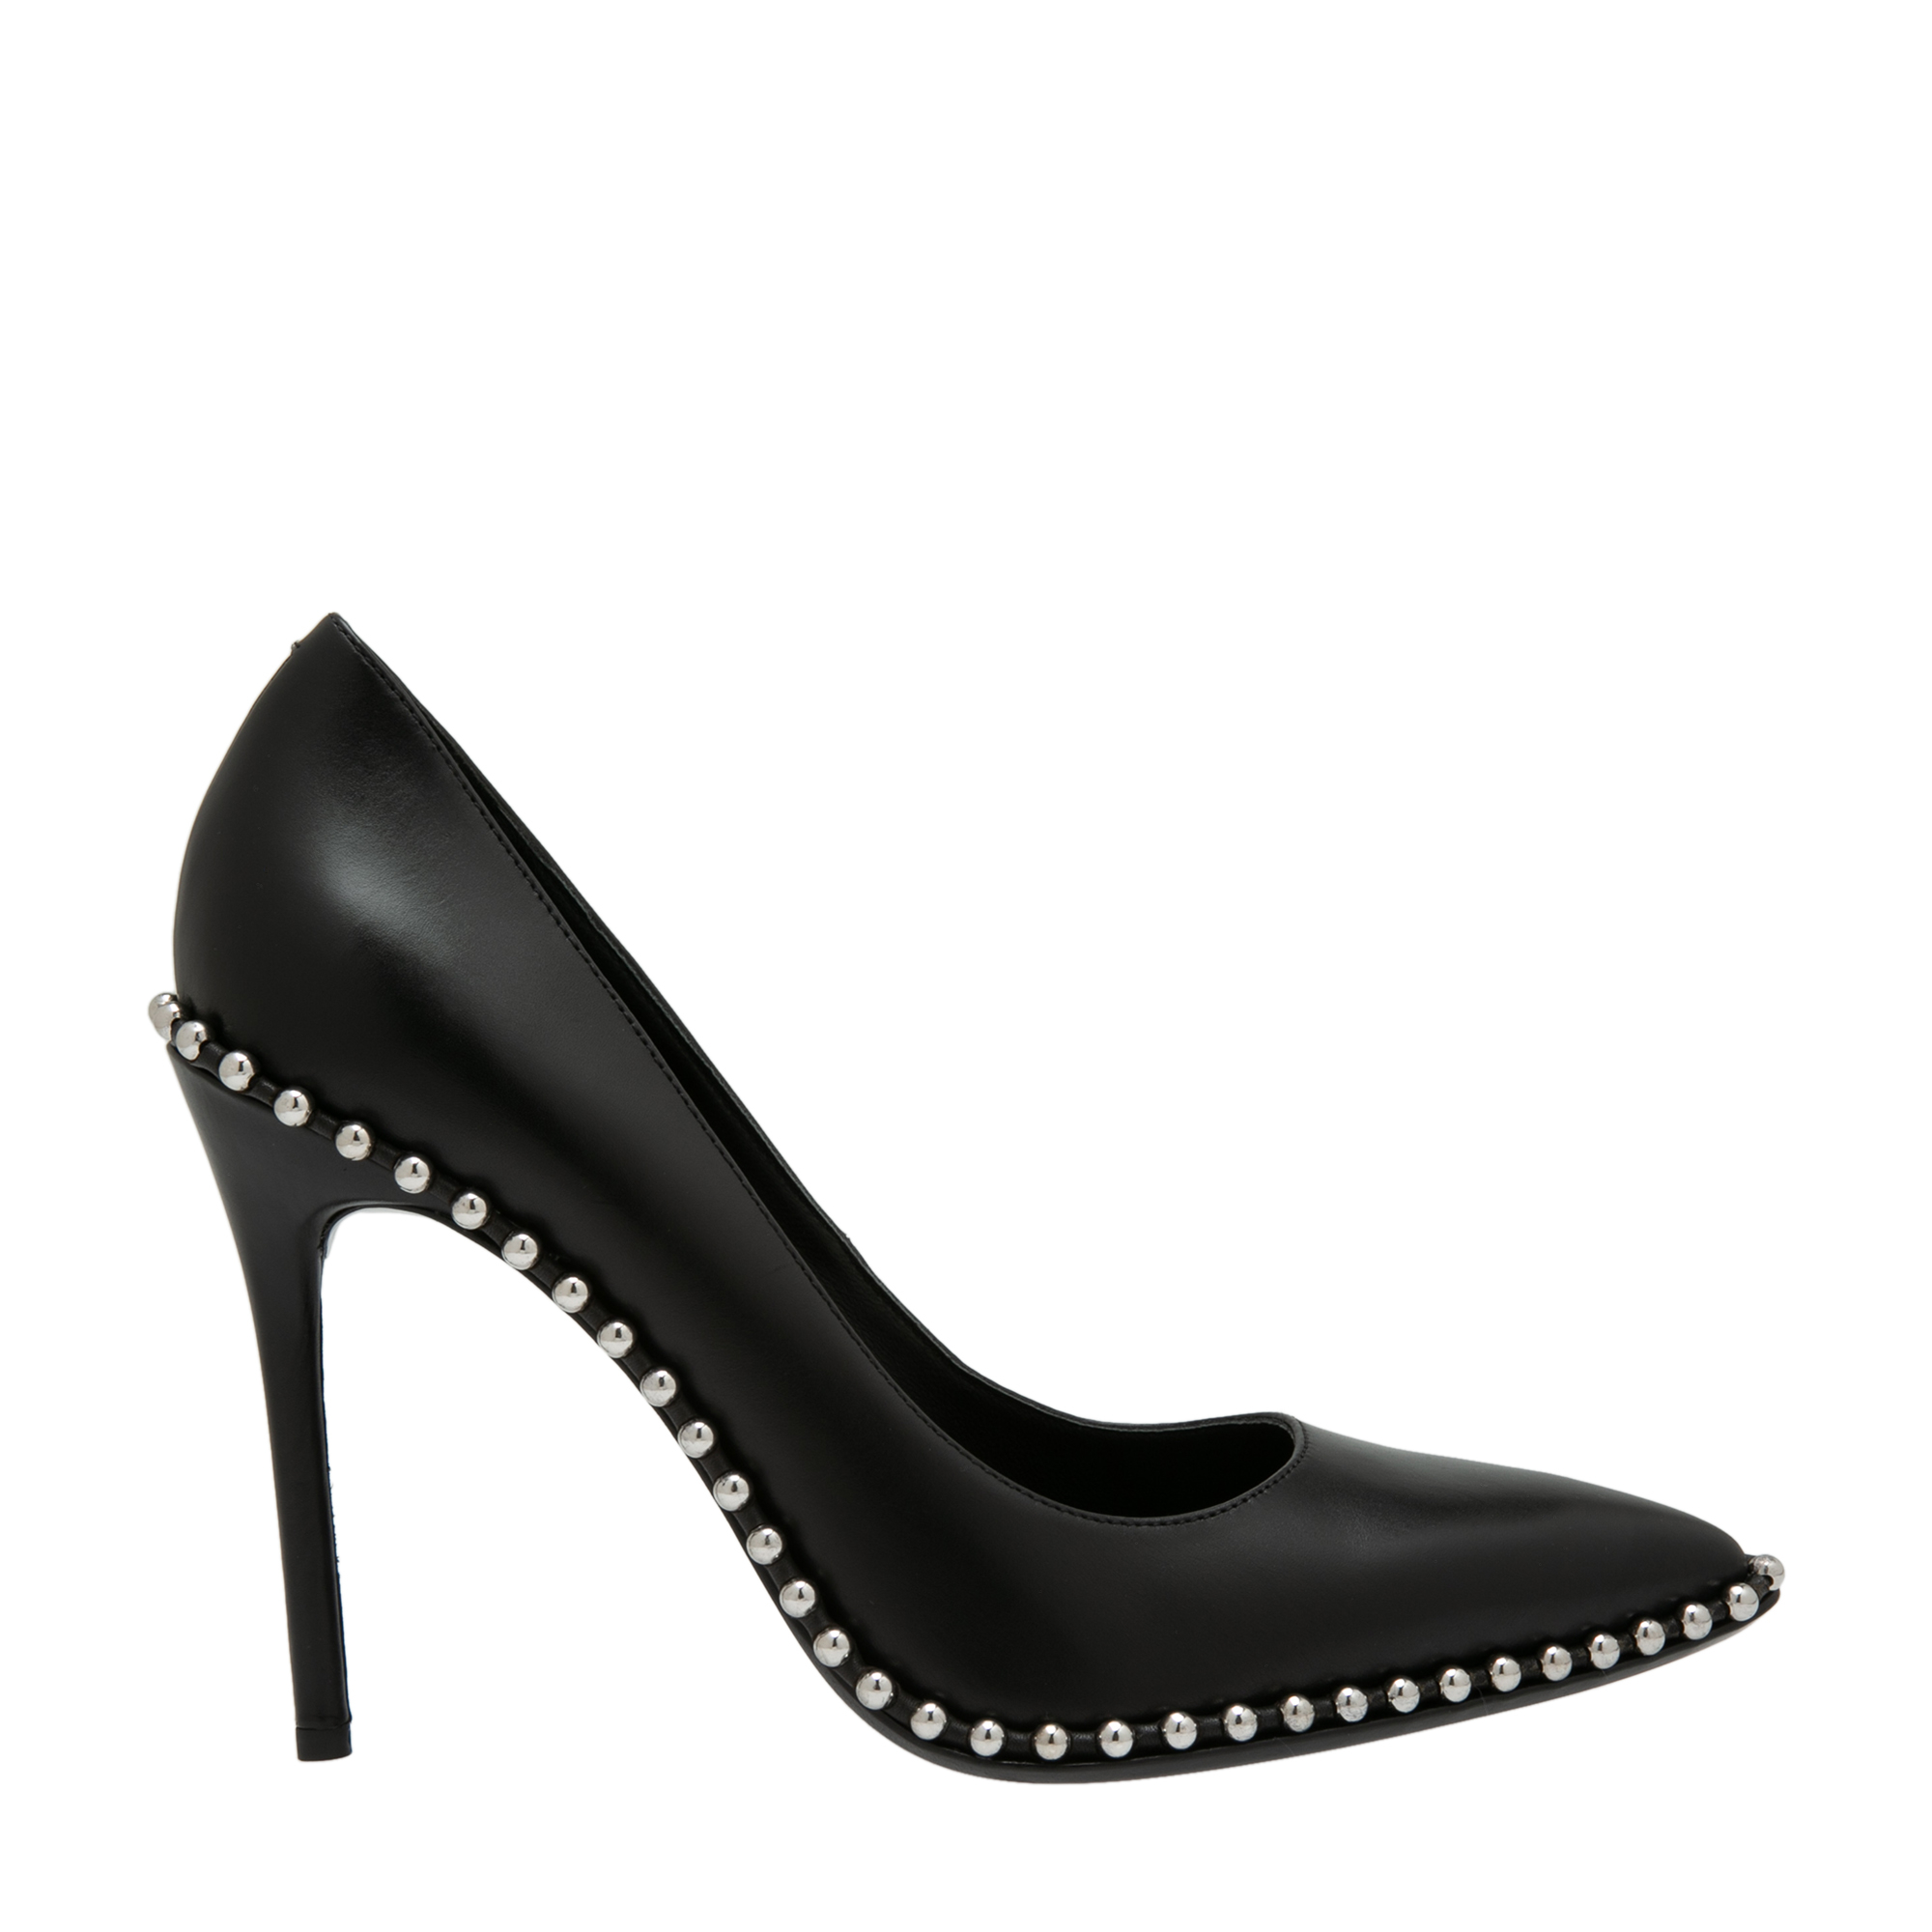 Rie leather pumps